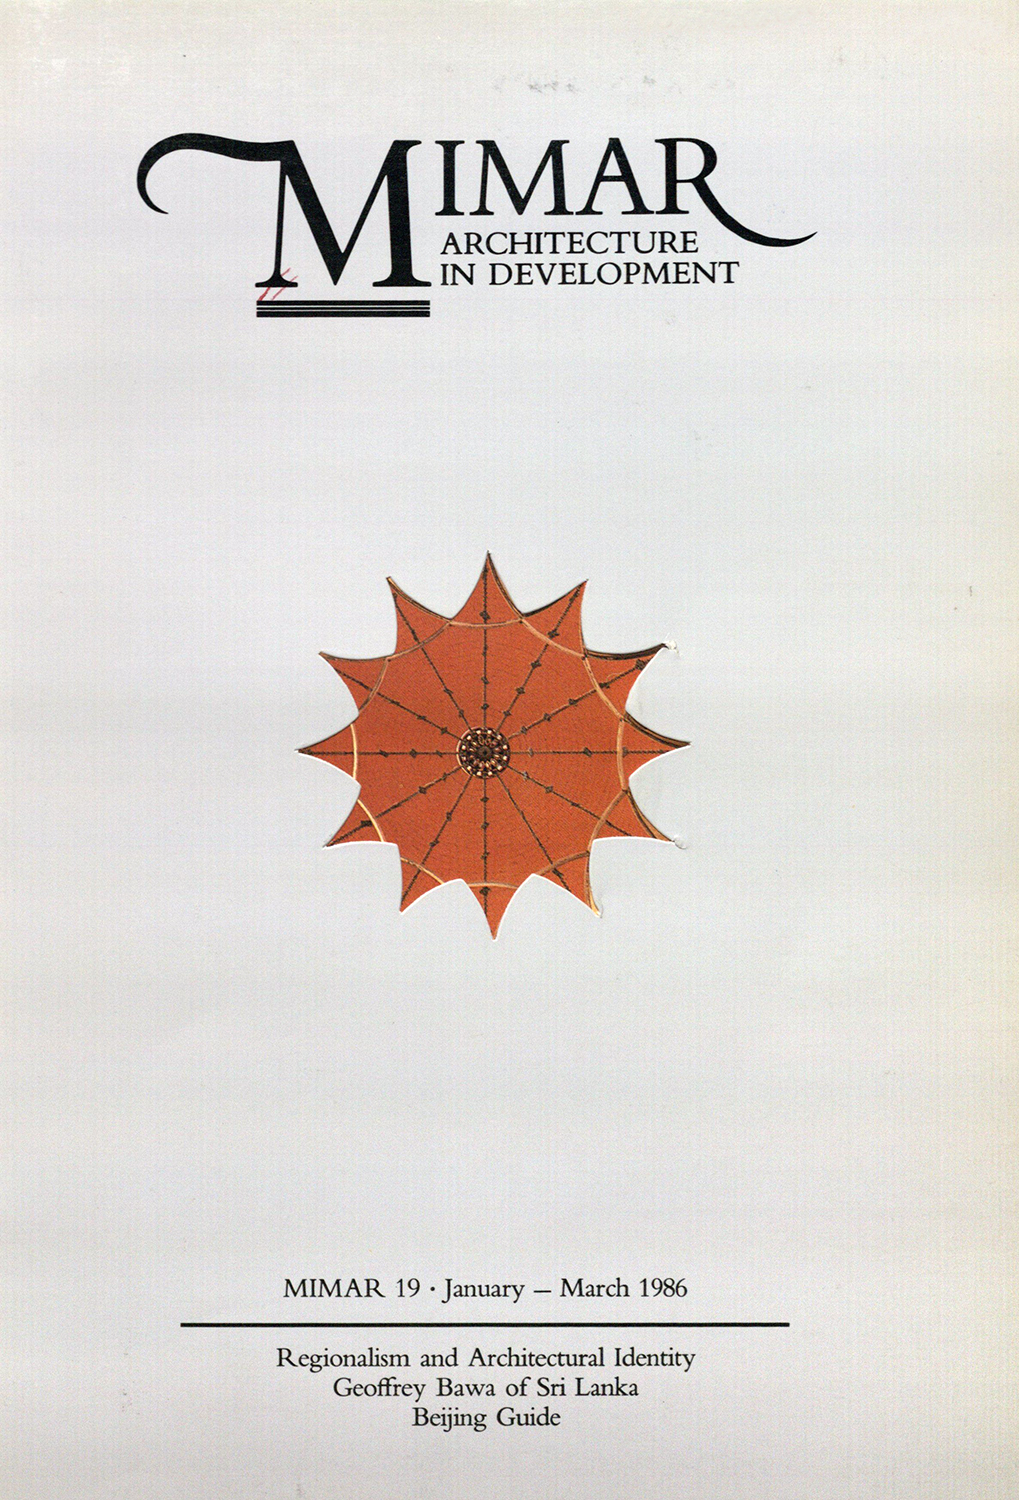 Hasan-Uddin Khan - Mimar: Architecture in Development was first published in 1981 and had a print run of 43 issues. At the time of Mimar's inception, it was the only international architecture magazine focusing on architecture in the developing world and related issues of concern. It aimed at exchanging ideas and images between countries which are developing new directions for their built environment. Mimar has been and continues to be one of the most requested resources on Archnet.